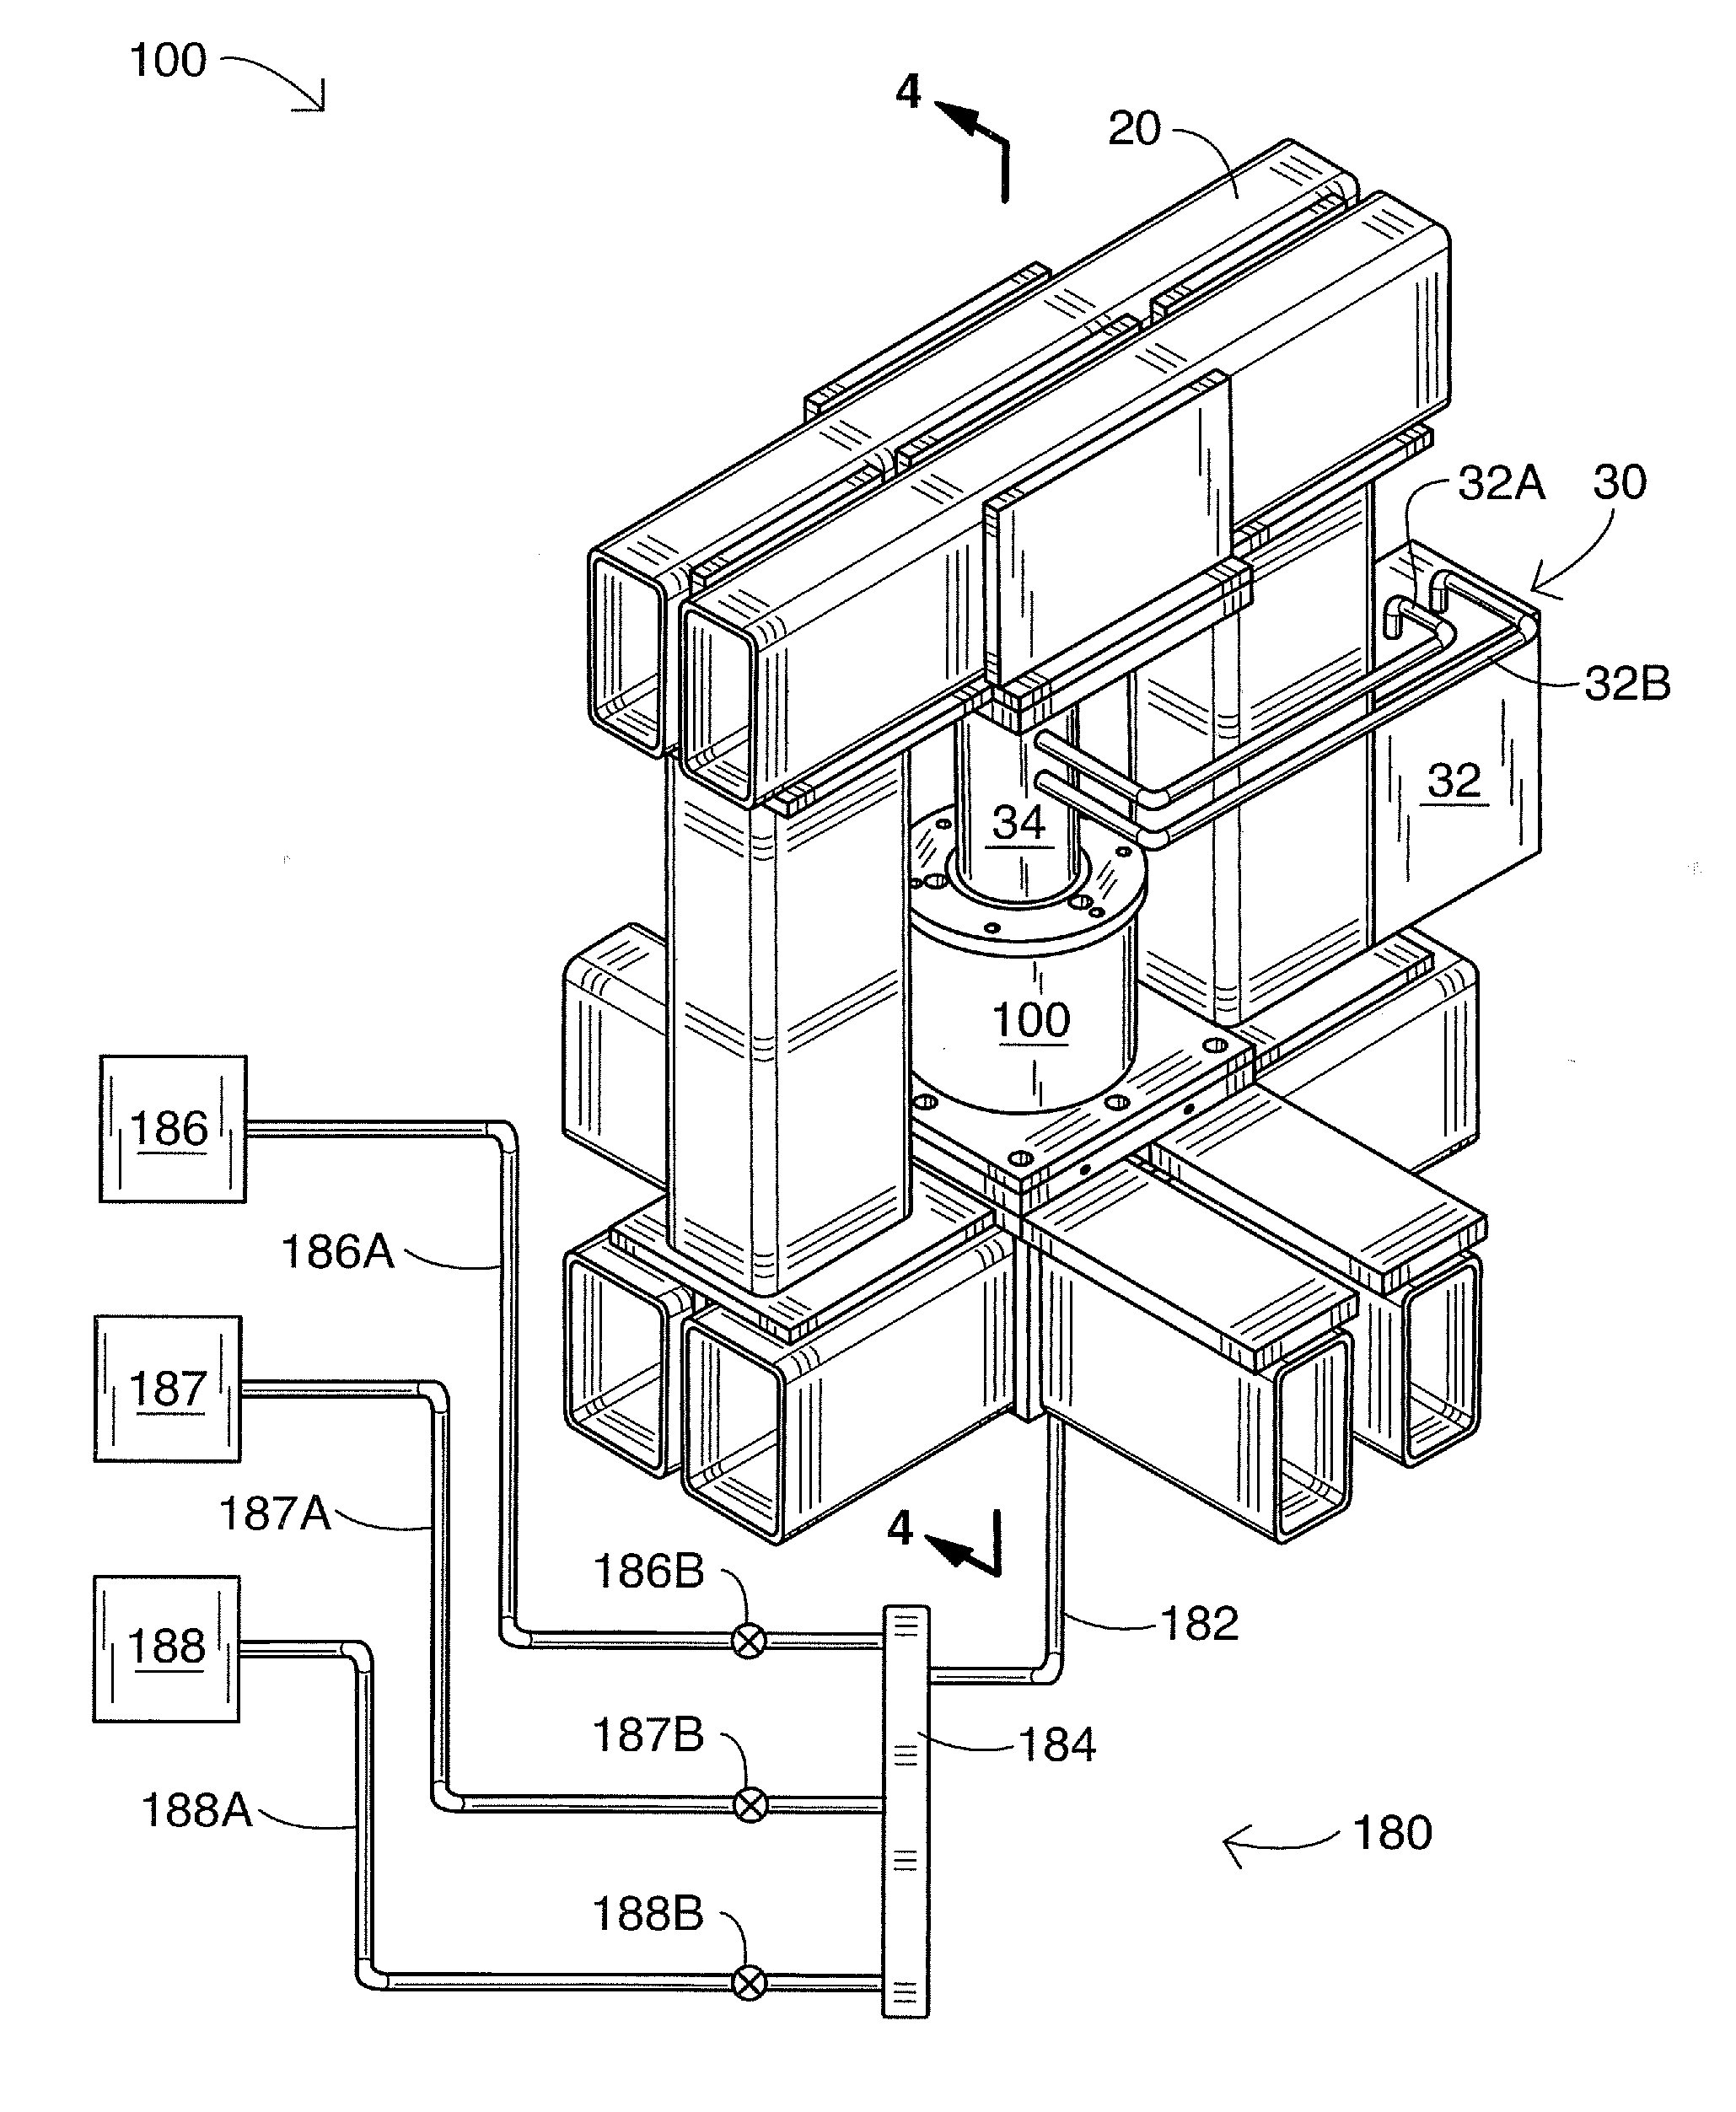 Compactor Systems and Methods for Compacting a Mass